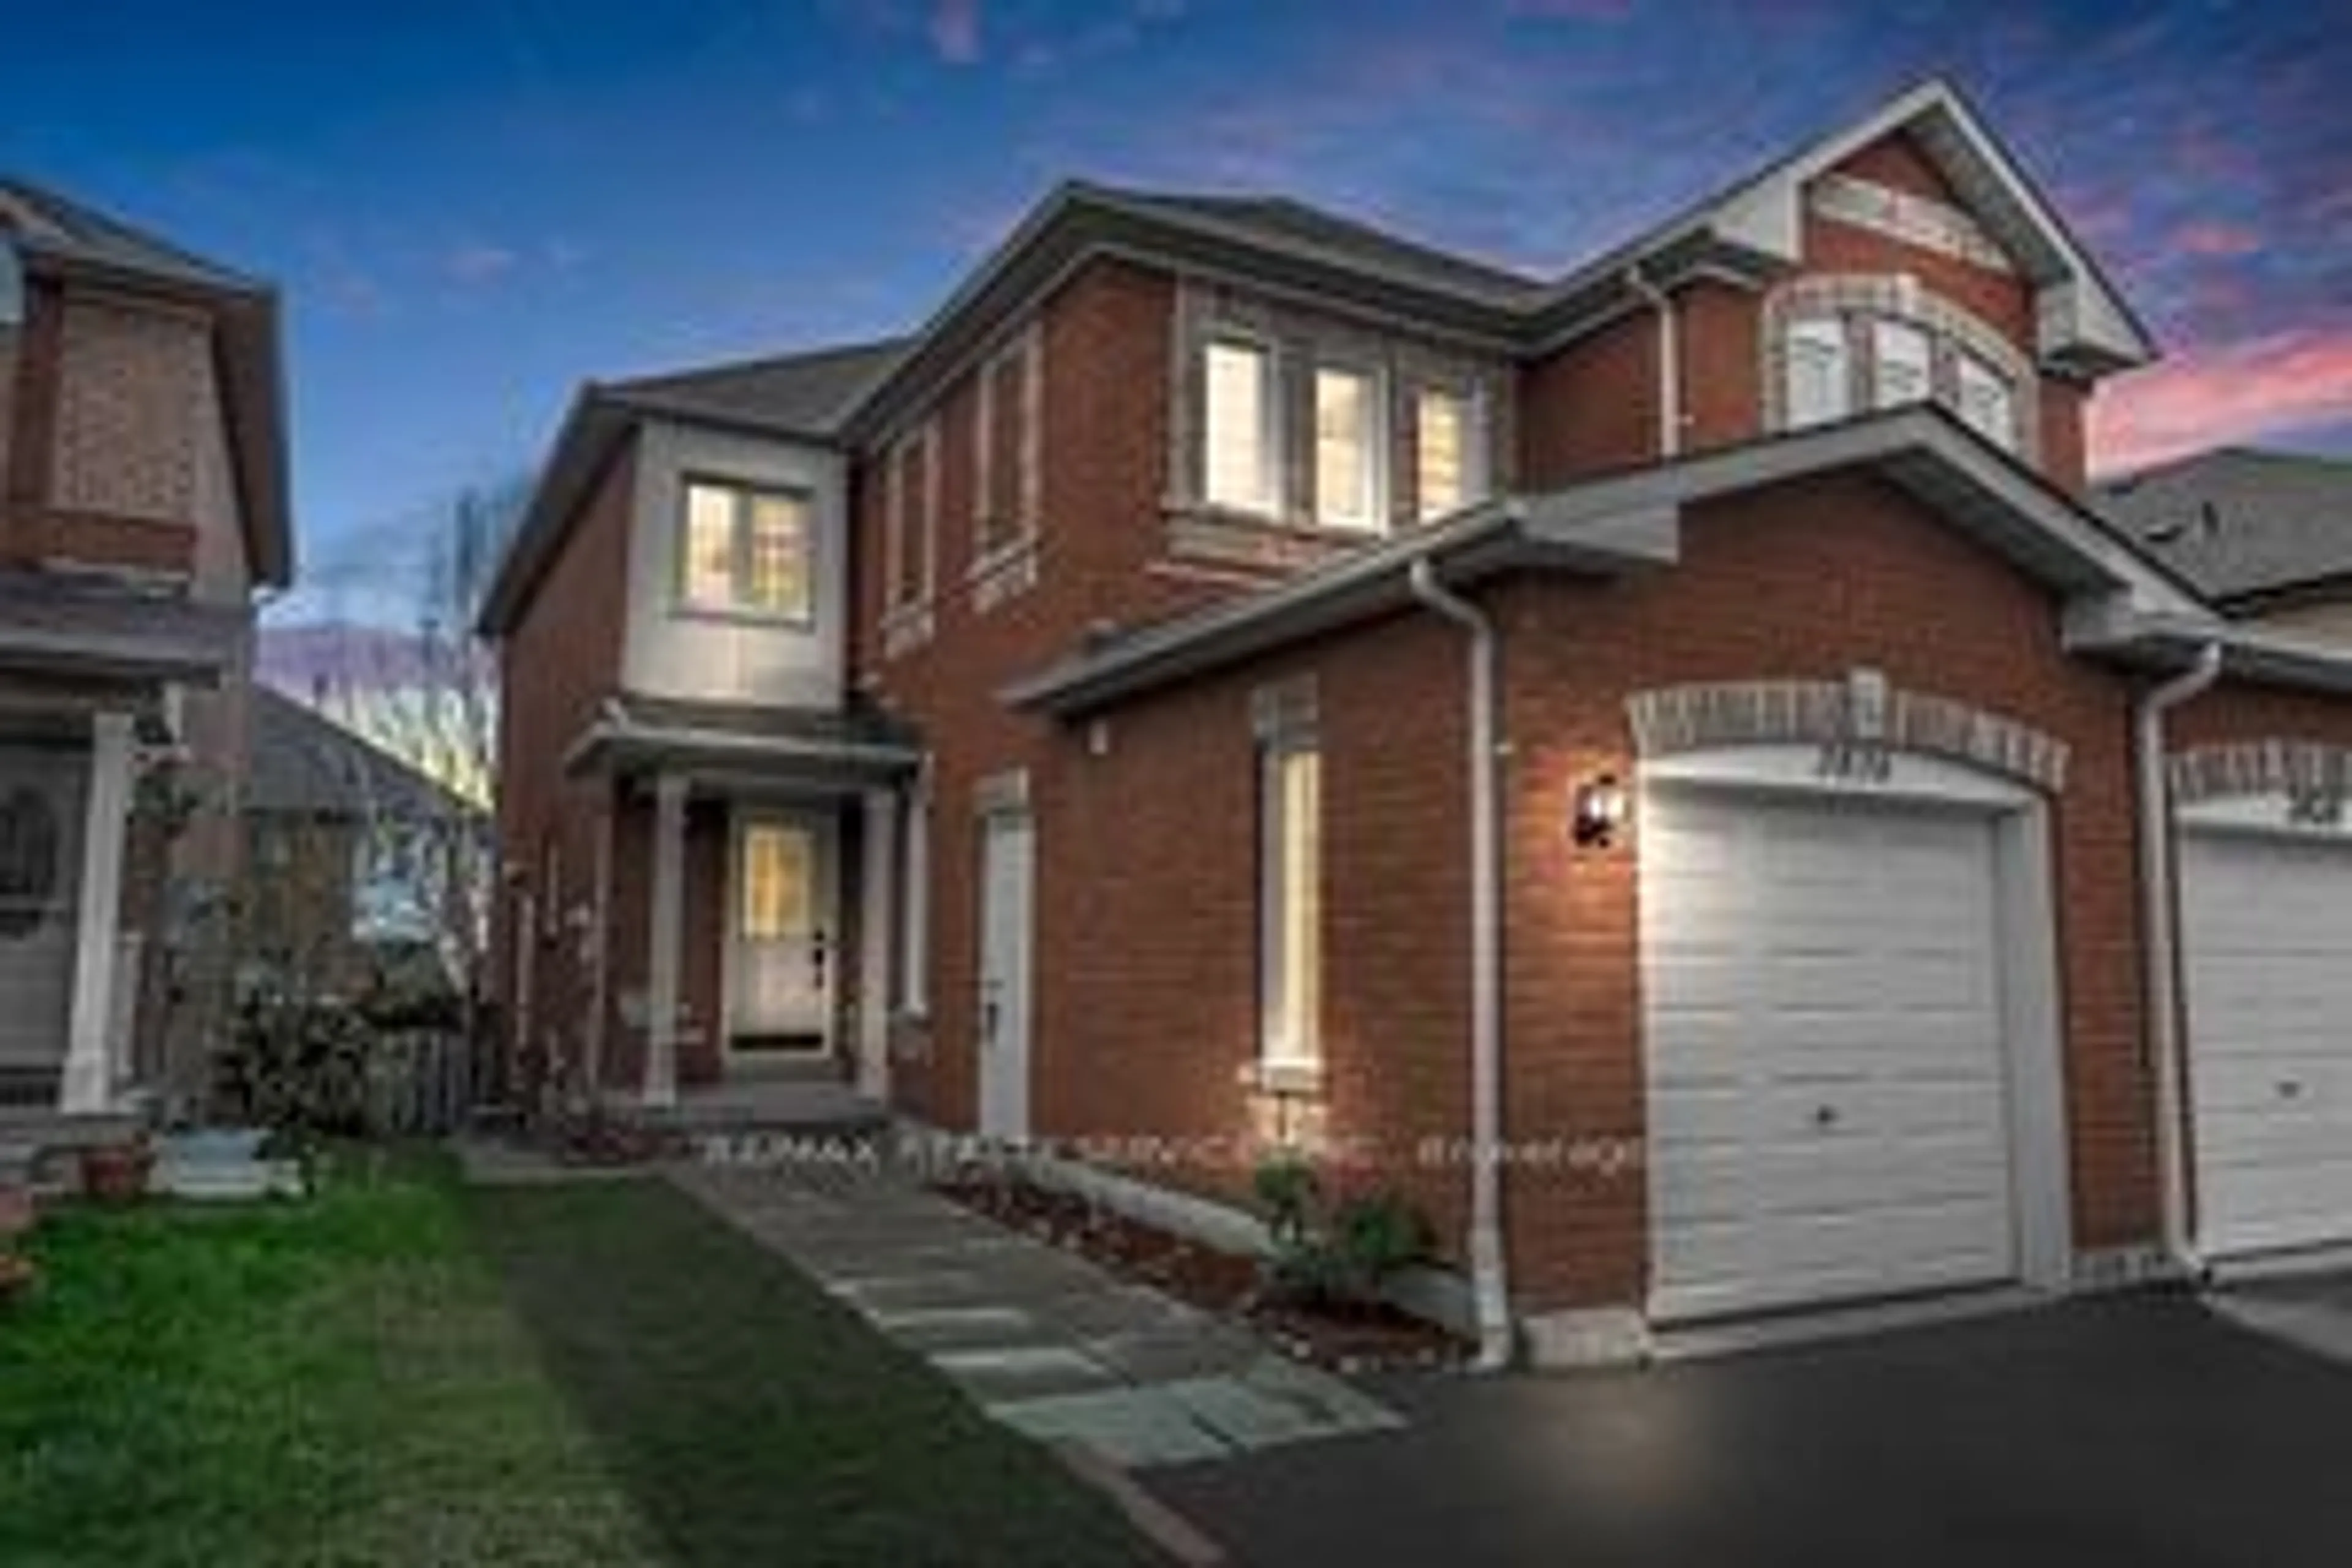 Home with brick exterior material for 3836 Allcroft Rd, Mississauga Ontario L5N 6V6